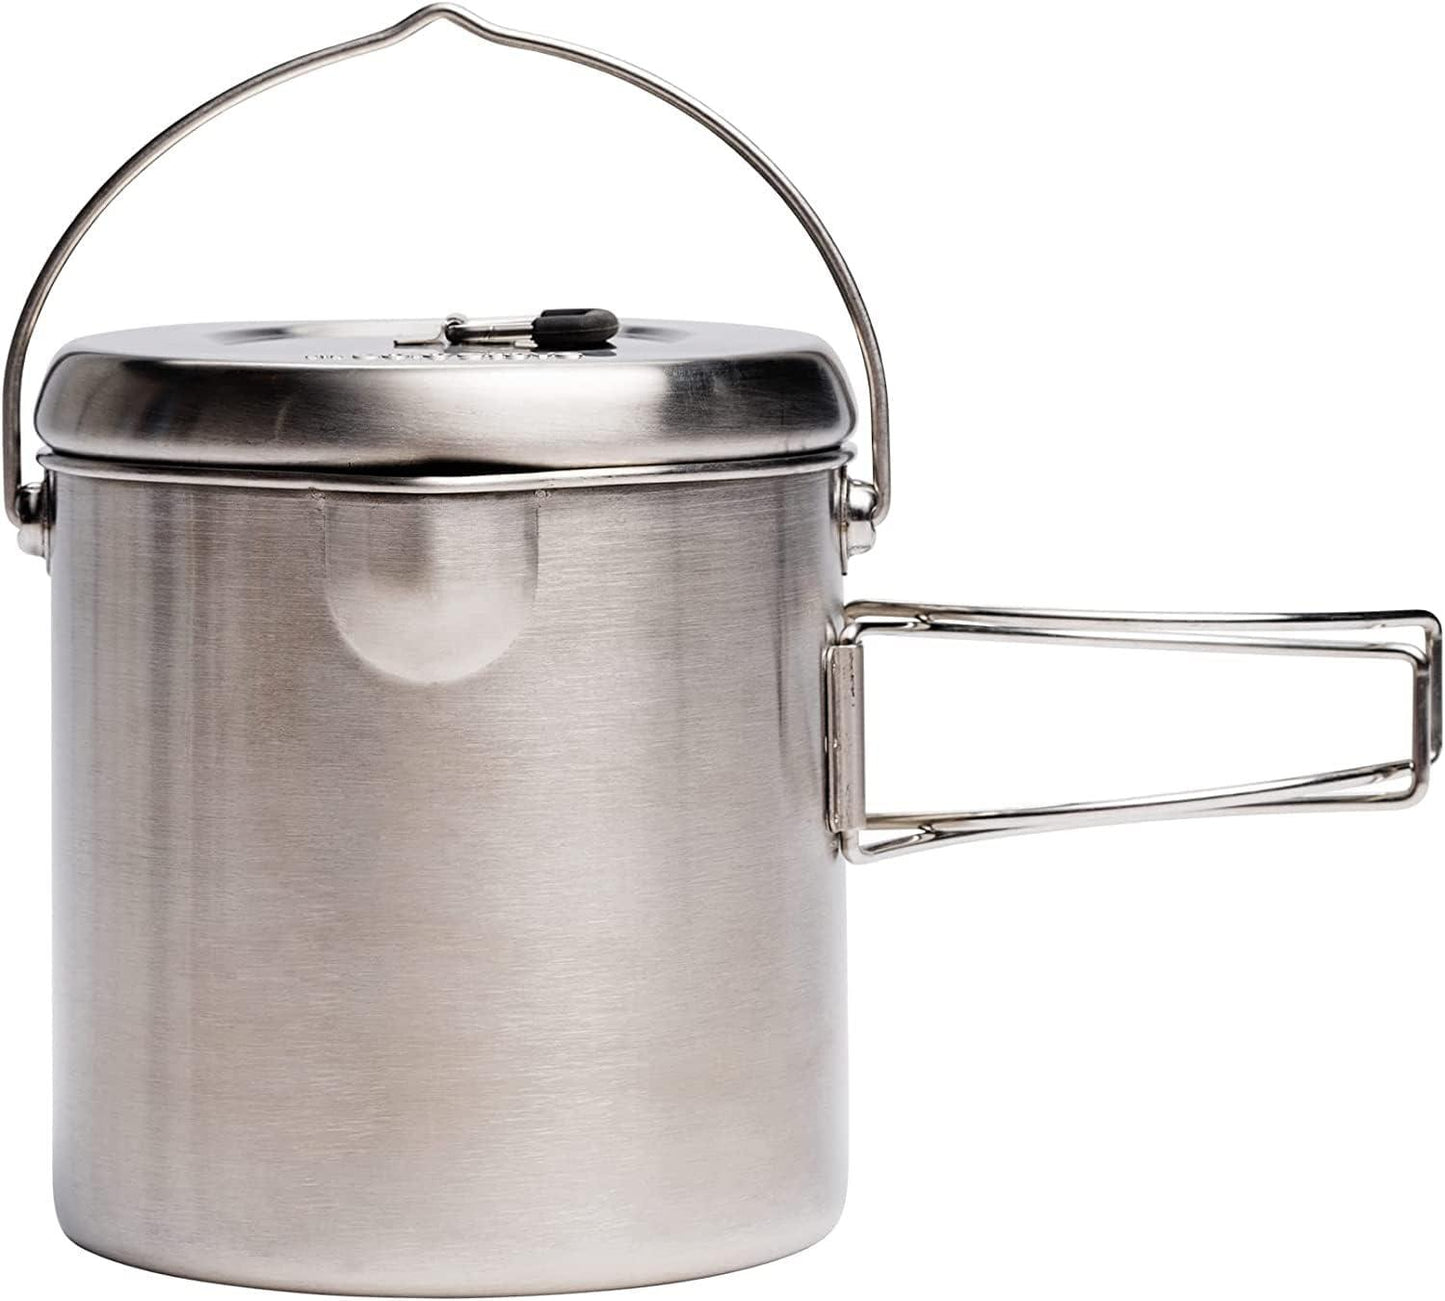 Solo Stove Pot 900/1800/4000 Stainless Steel Companion Pots | Lightweight Aluminum Pot Holding Tripod | Great Portable Cookware for Backpacking, Camping & Survival Adventures | Deisgned for use with Lite/Titan/Campfire Solo Stoves - TRAPSKI, LLC